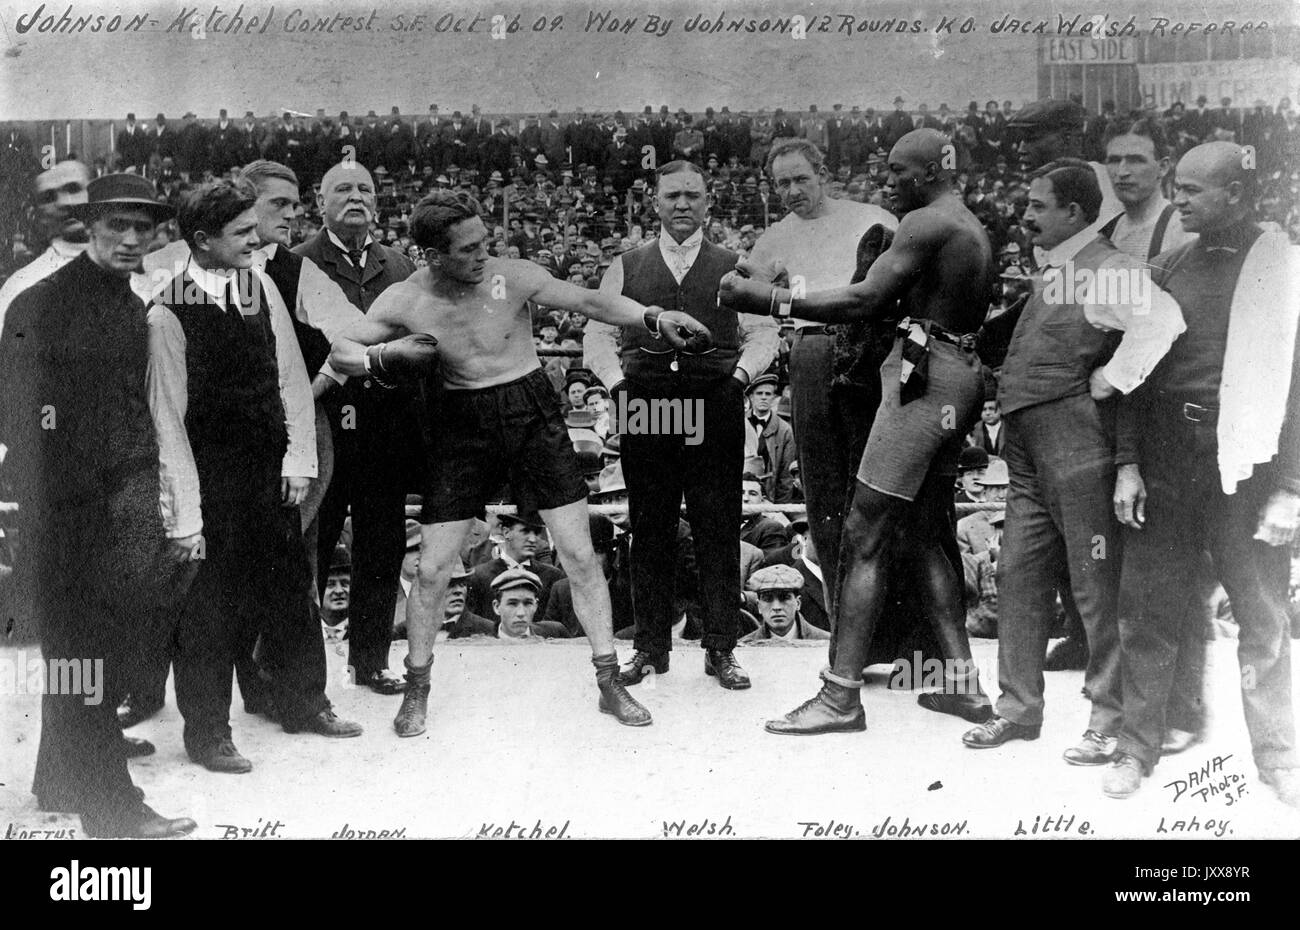 Boxers Stanley Ketchel (center left) and Jack Johnson (center right) stand in the ring before their famous match, with California boxing referee Jack Welsh (center) standing between the two boxers, surrounded by other industry members, in Colma, California, 1909. Stock Photo